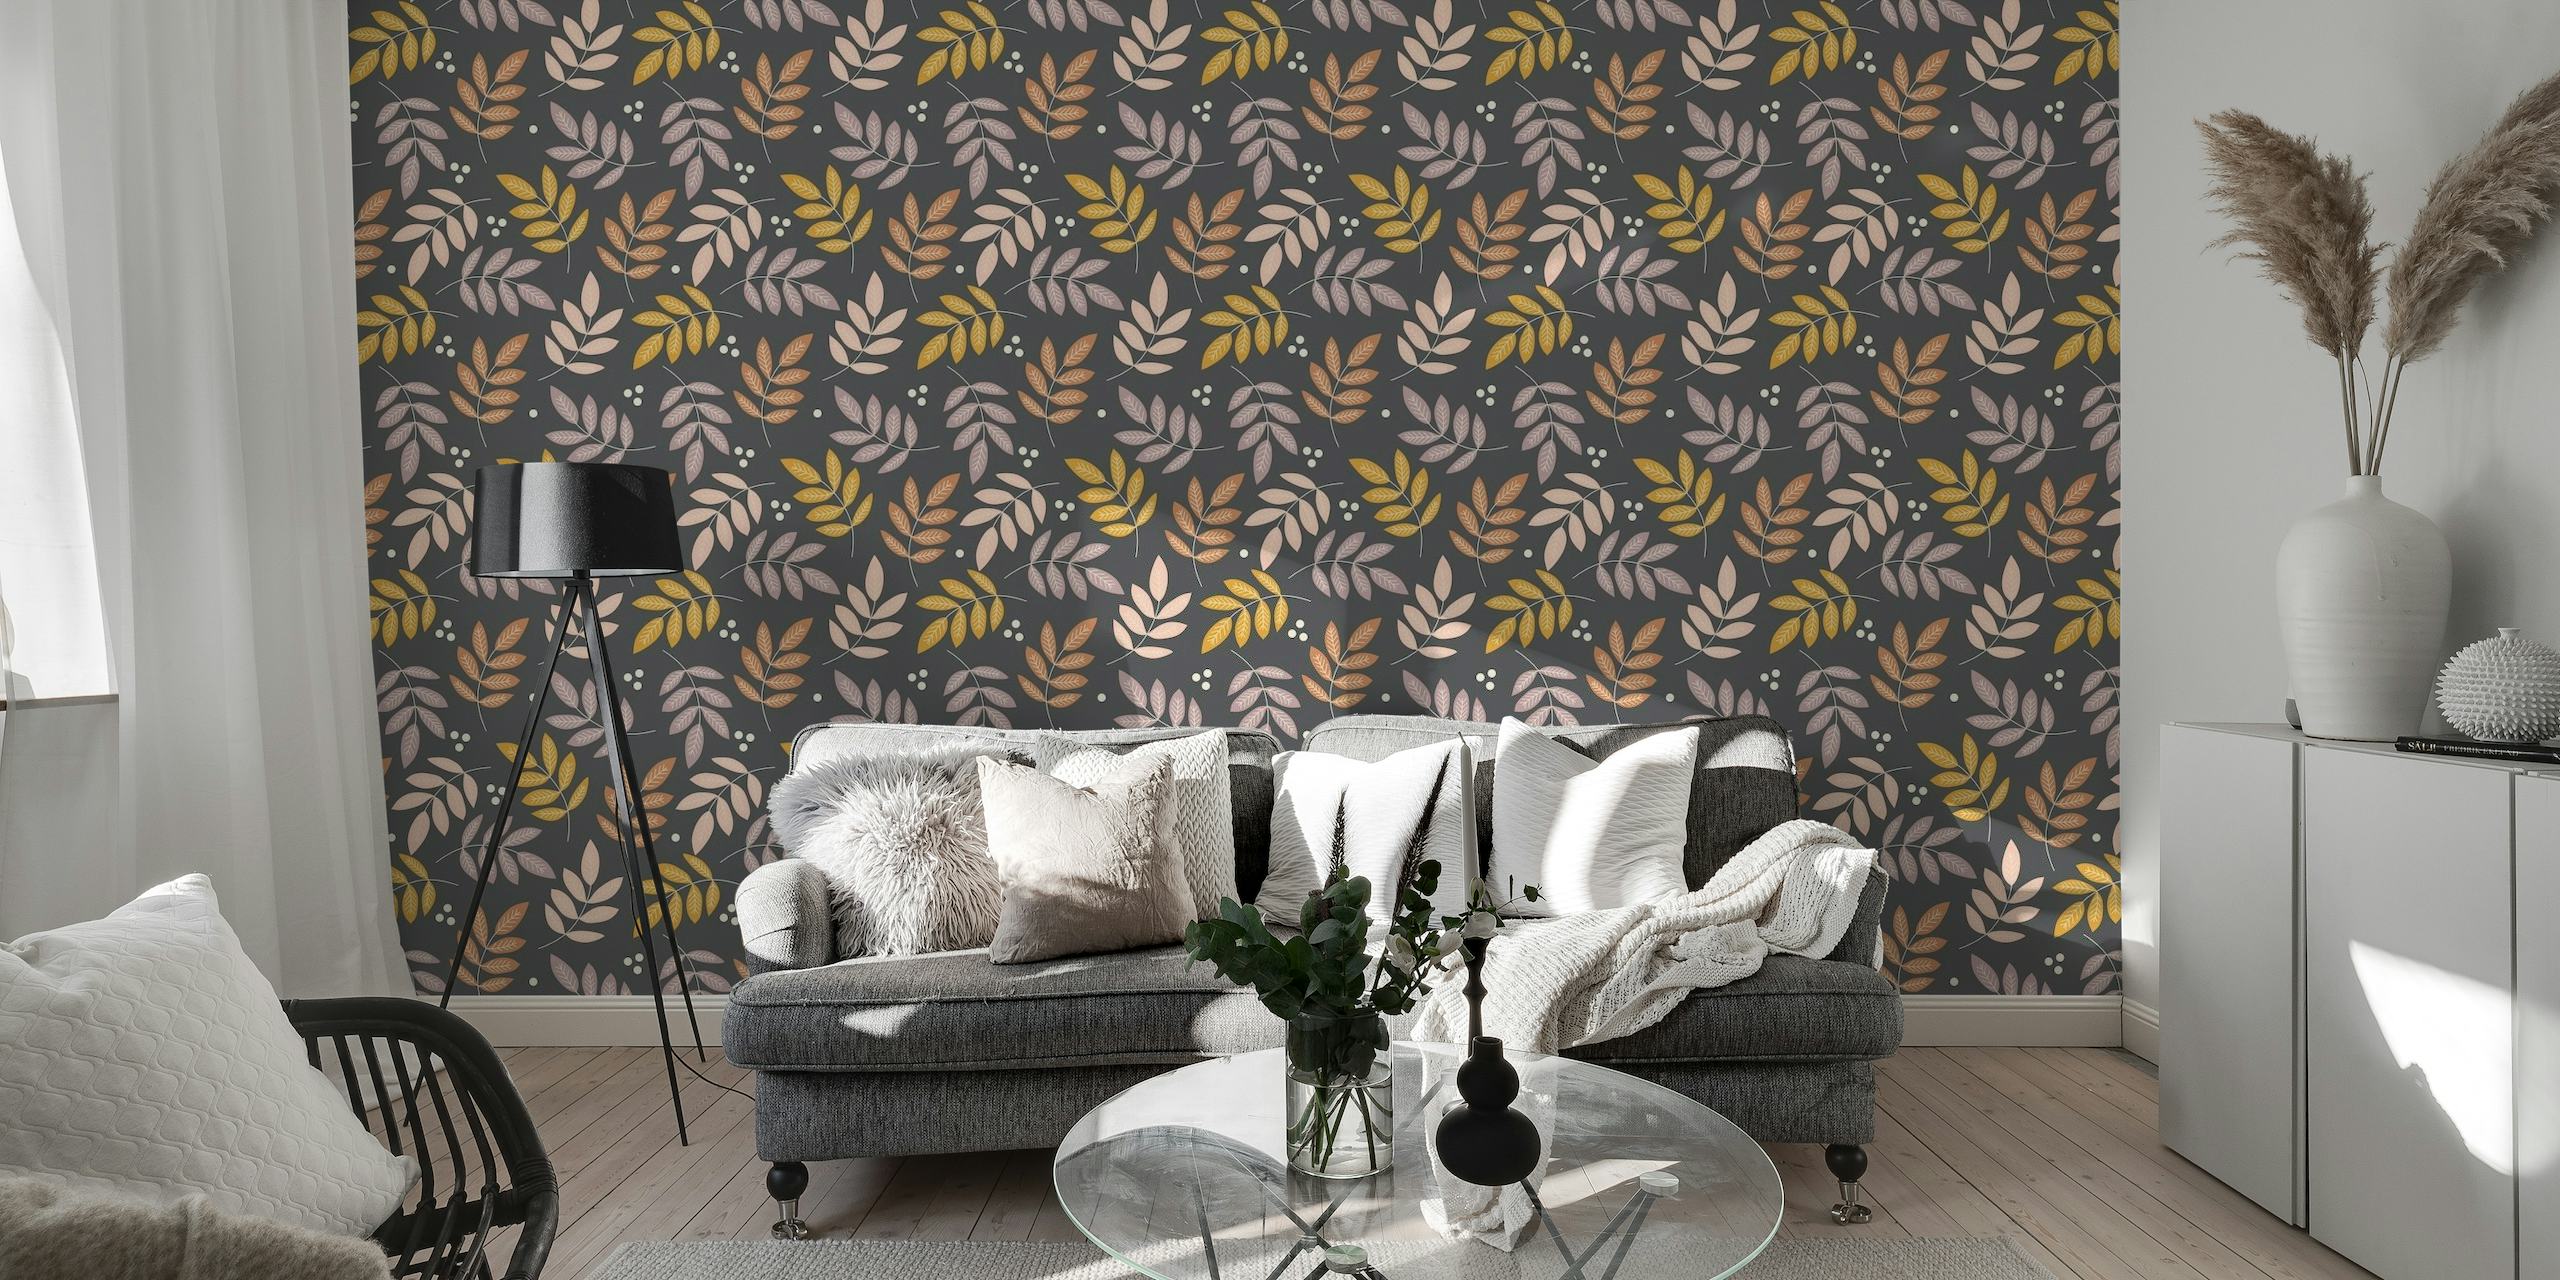 Aesthetic wall mural of leaves falling against a deep midnight background, perfect for interior decor.